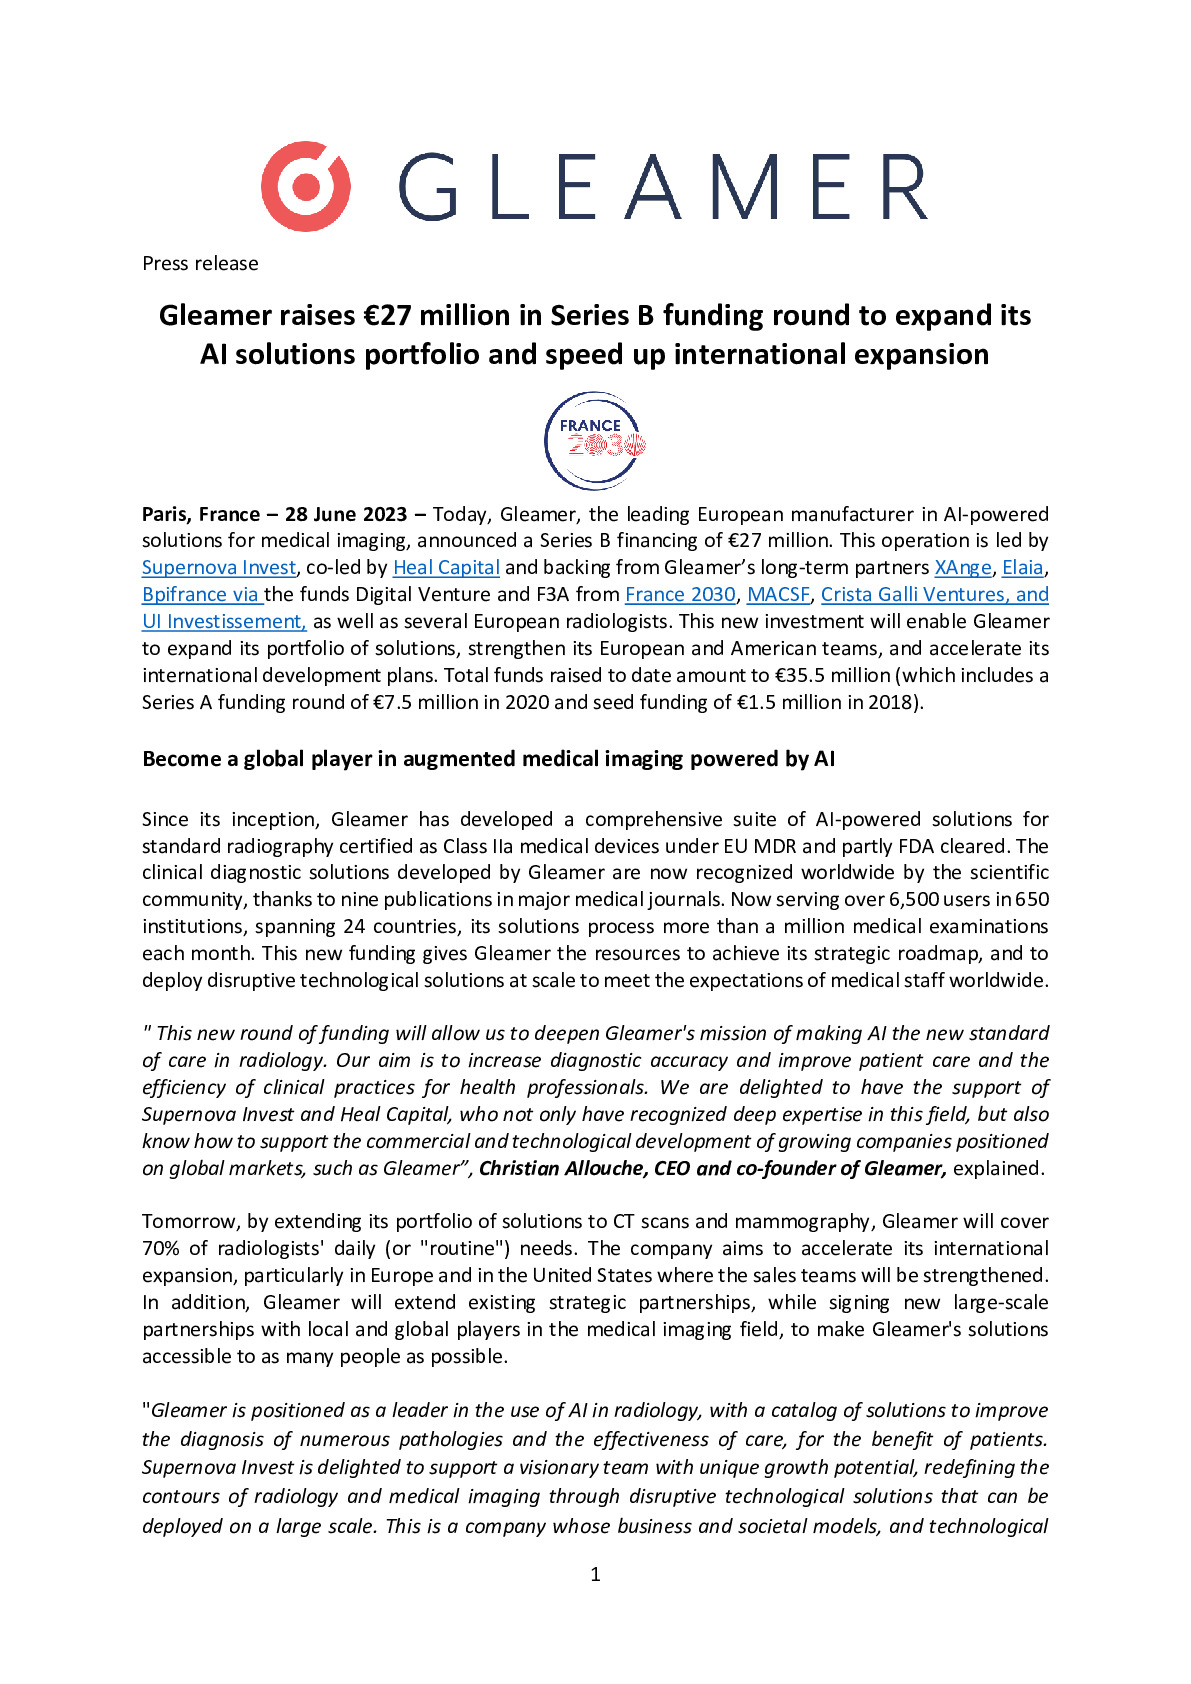 2023 06 28 – PR Gleamer raises €27 million in Series B funding round to expand its AI solutions portfolio and speed up international expansion -pdf